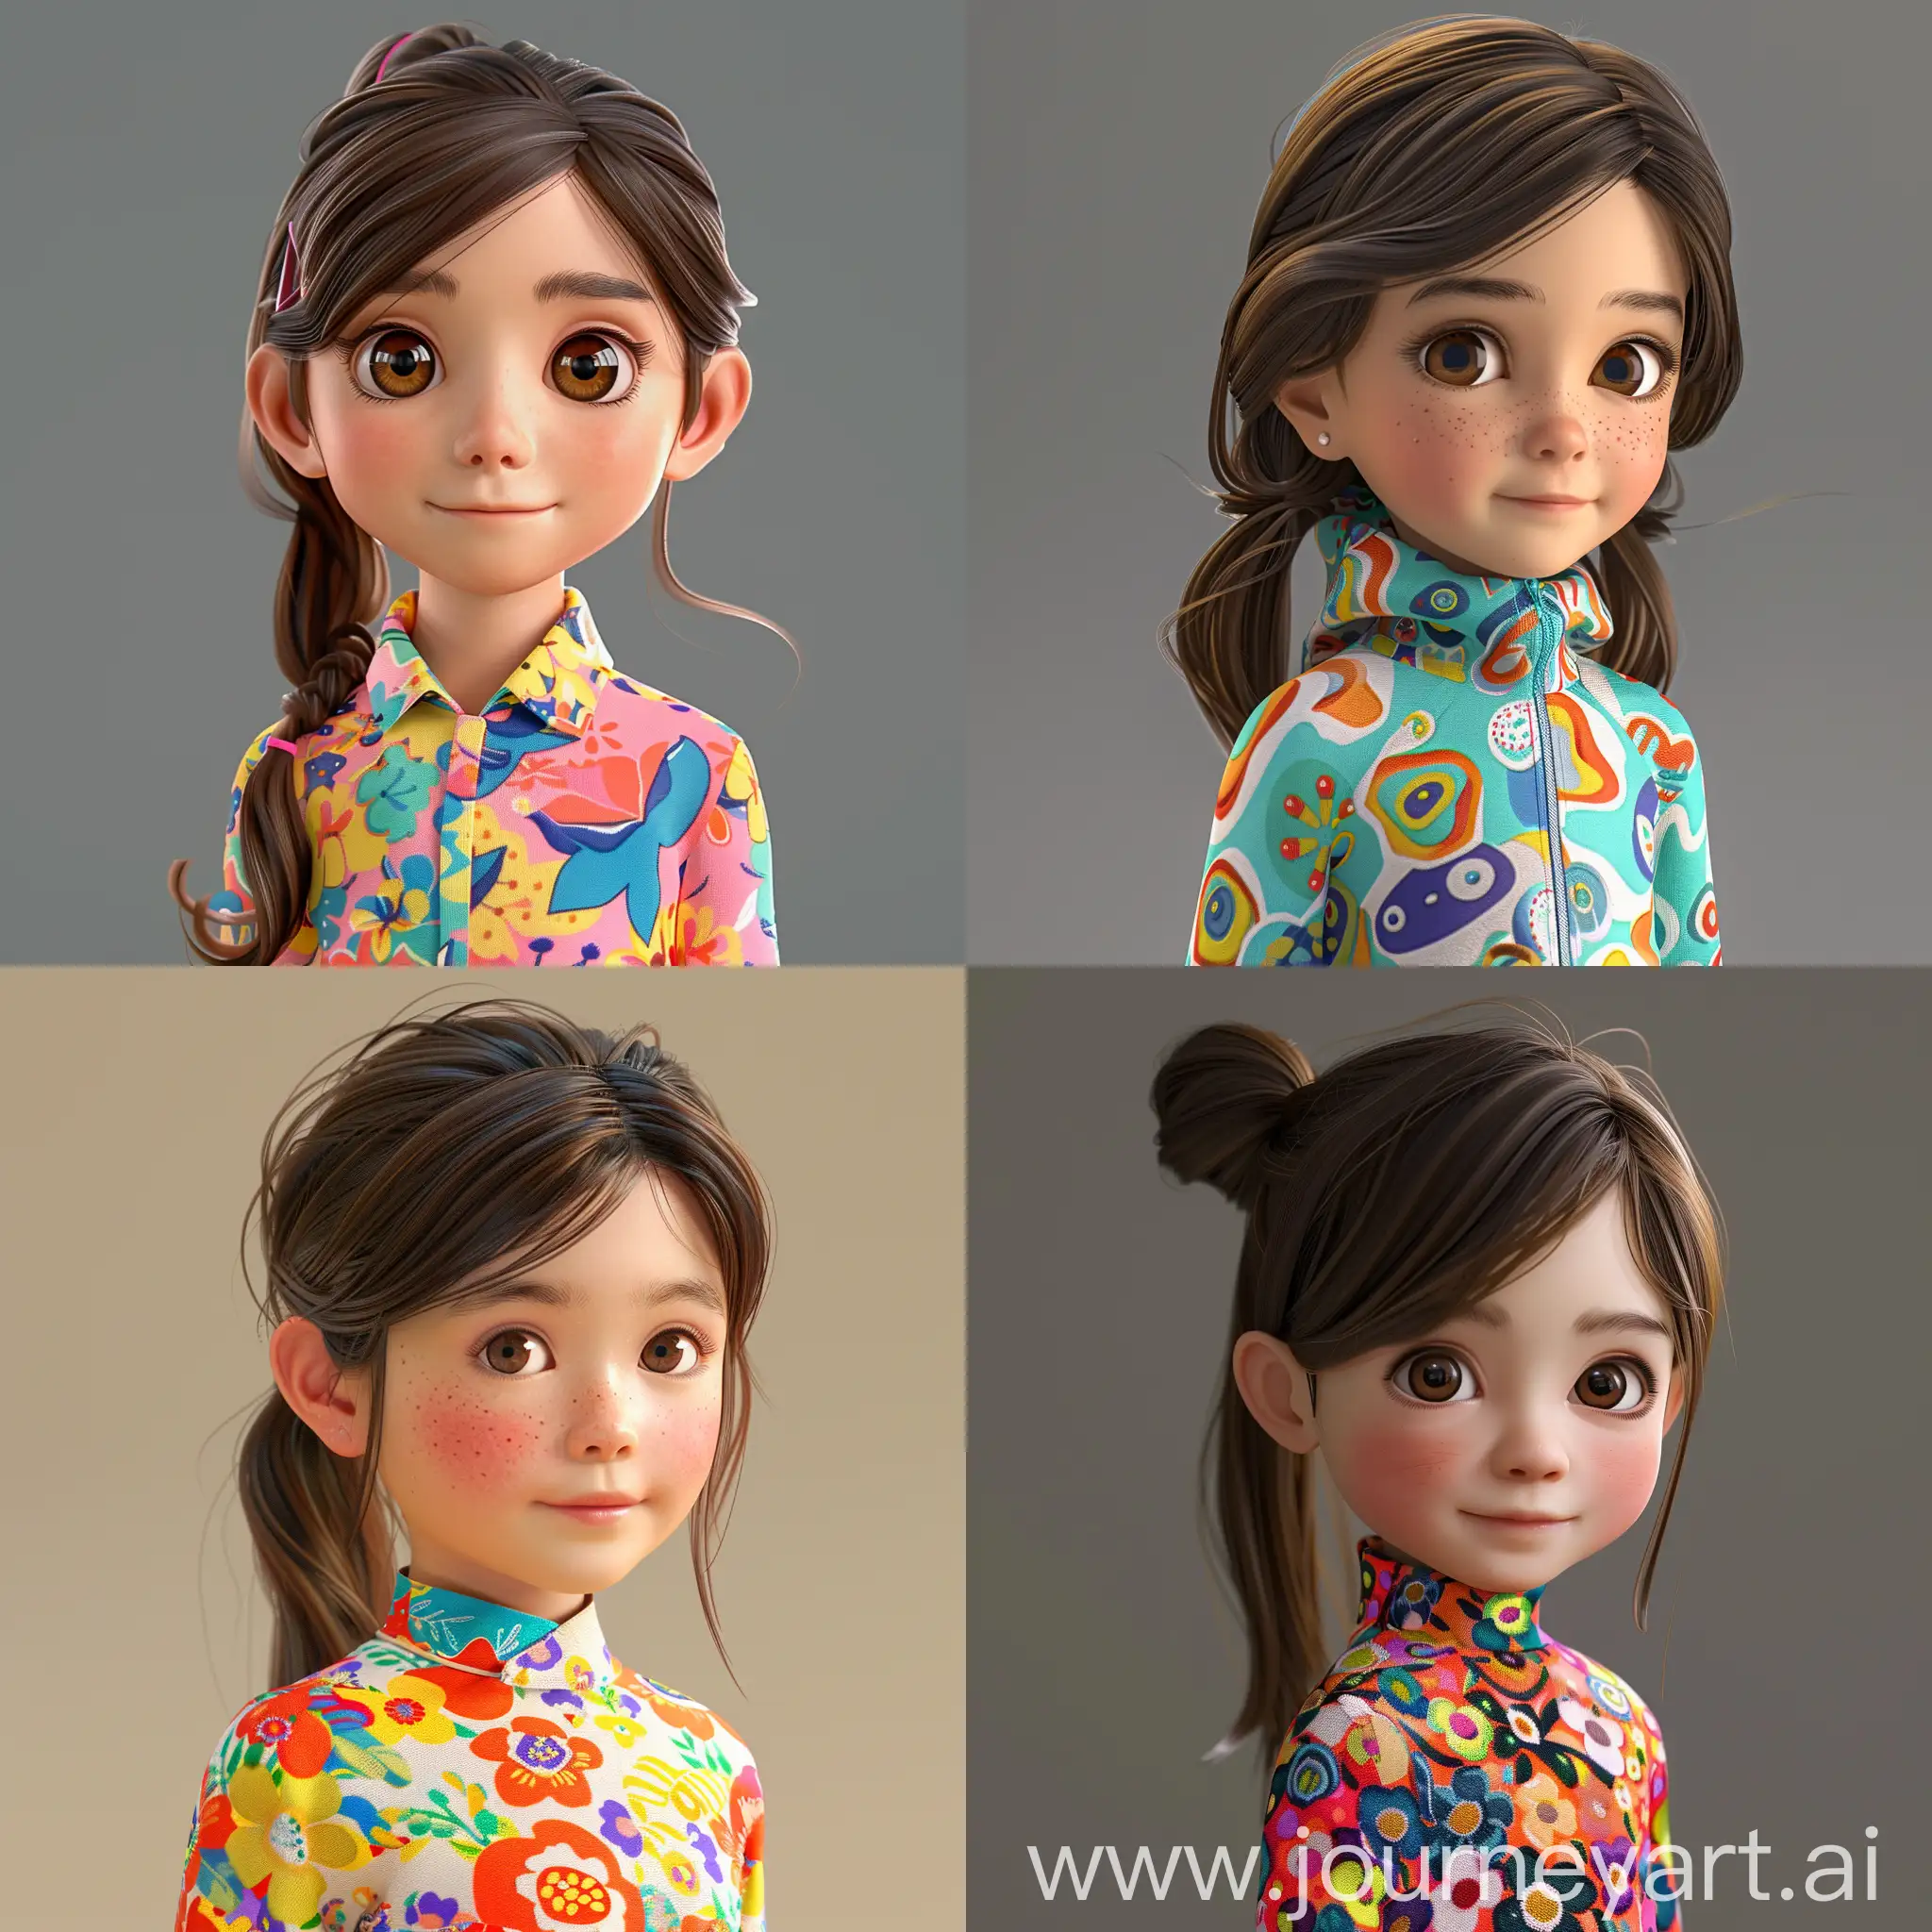 An 8 year old girl who is 75% caucasian and 25% korean. Brown hair and brown eyes. 3d type art in a pixar type style. Wearing matching fun colorful clothing with mid length hair pulled back in a pony tail.